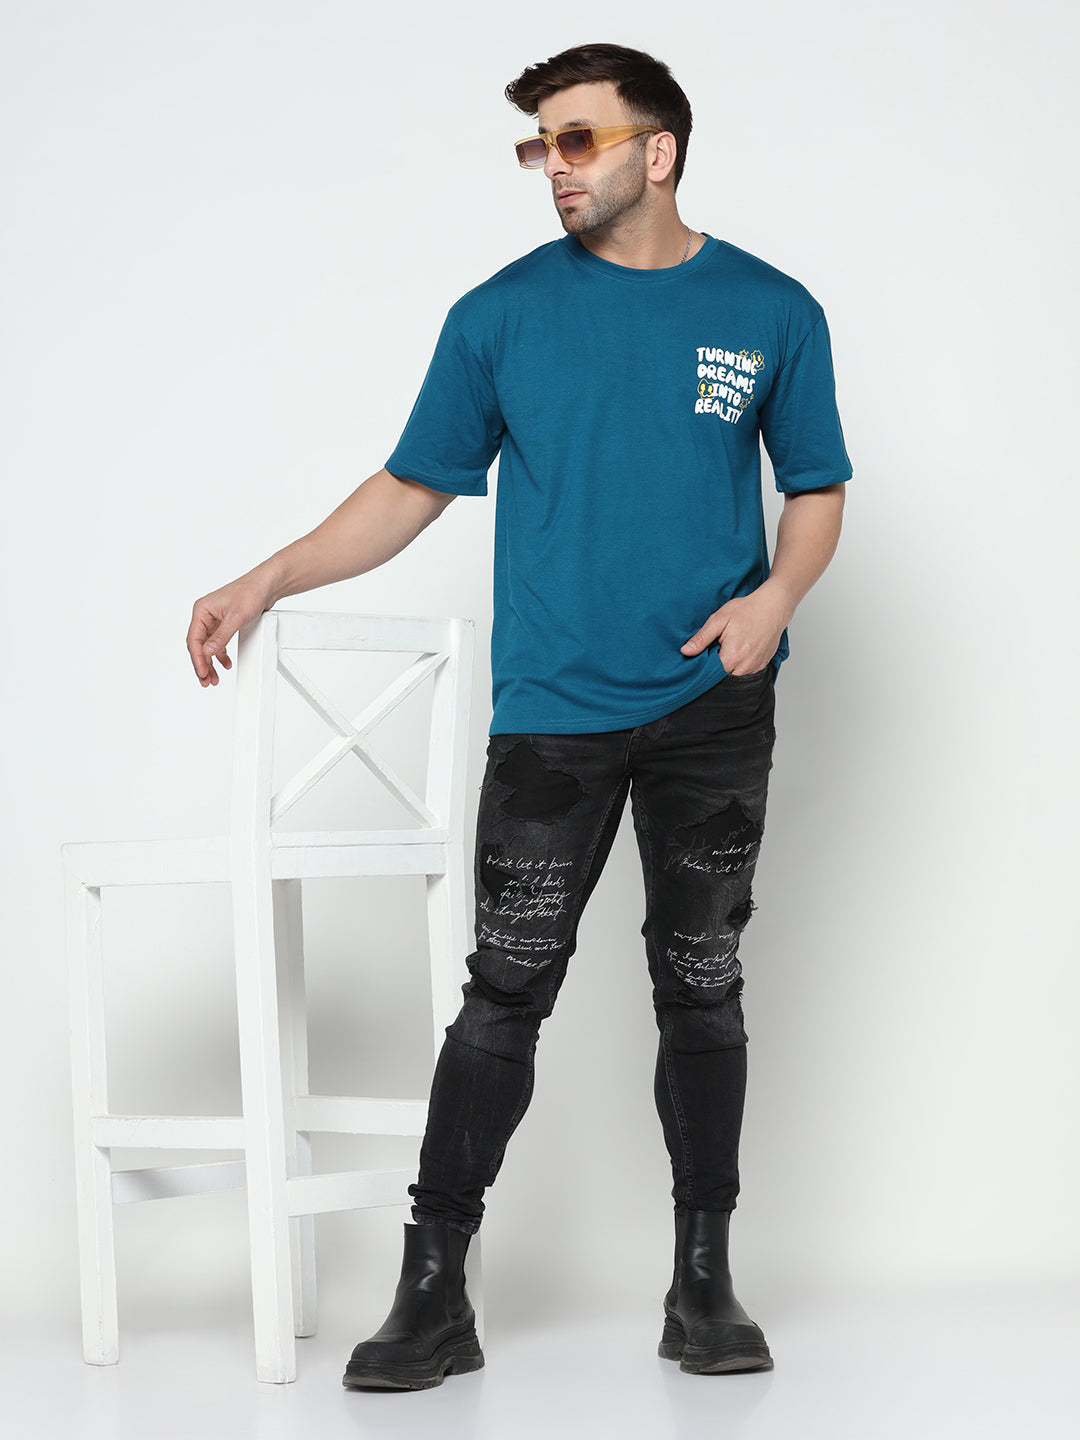 Oversized Teal Blue Printed T-Shirt